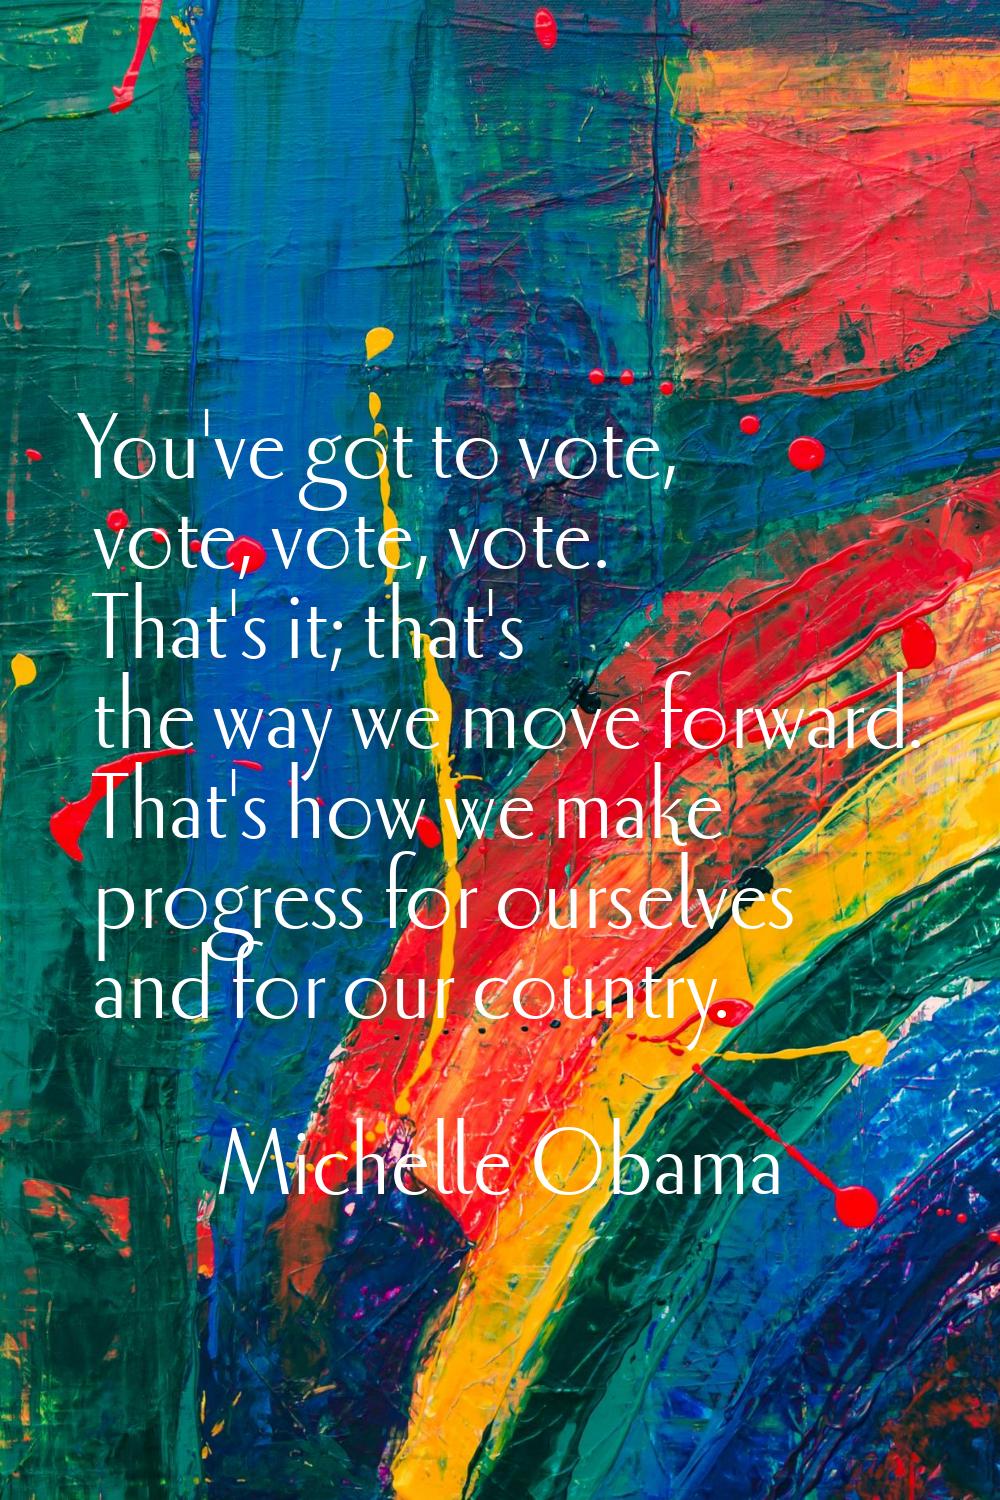 You've got to vote, vote, vote, vote. That's it; that's the way we move forward. That's how we make